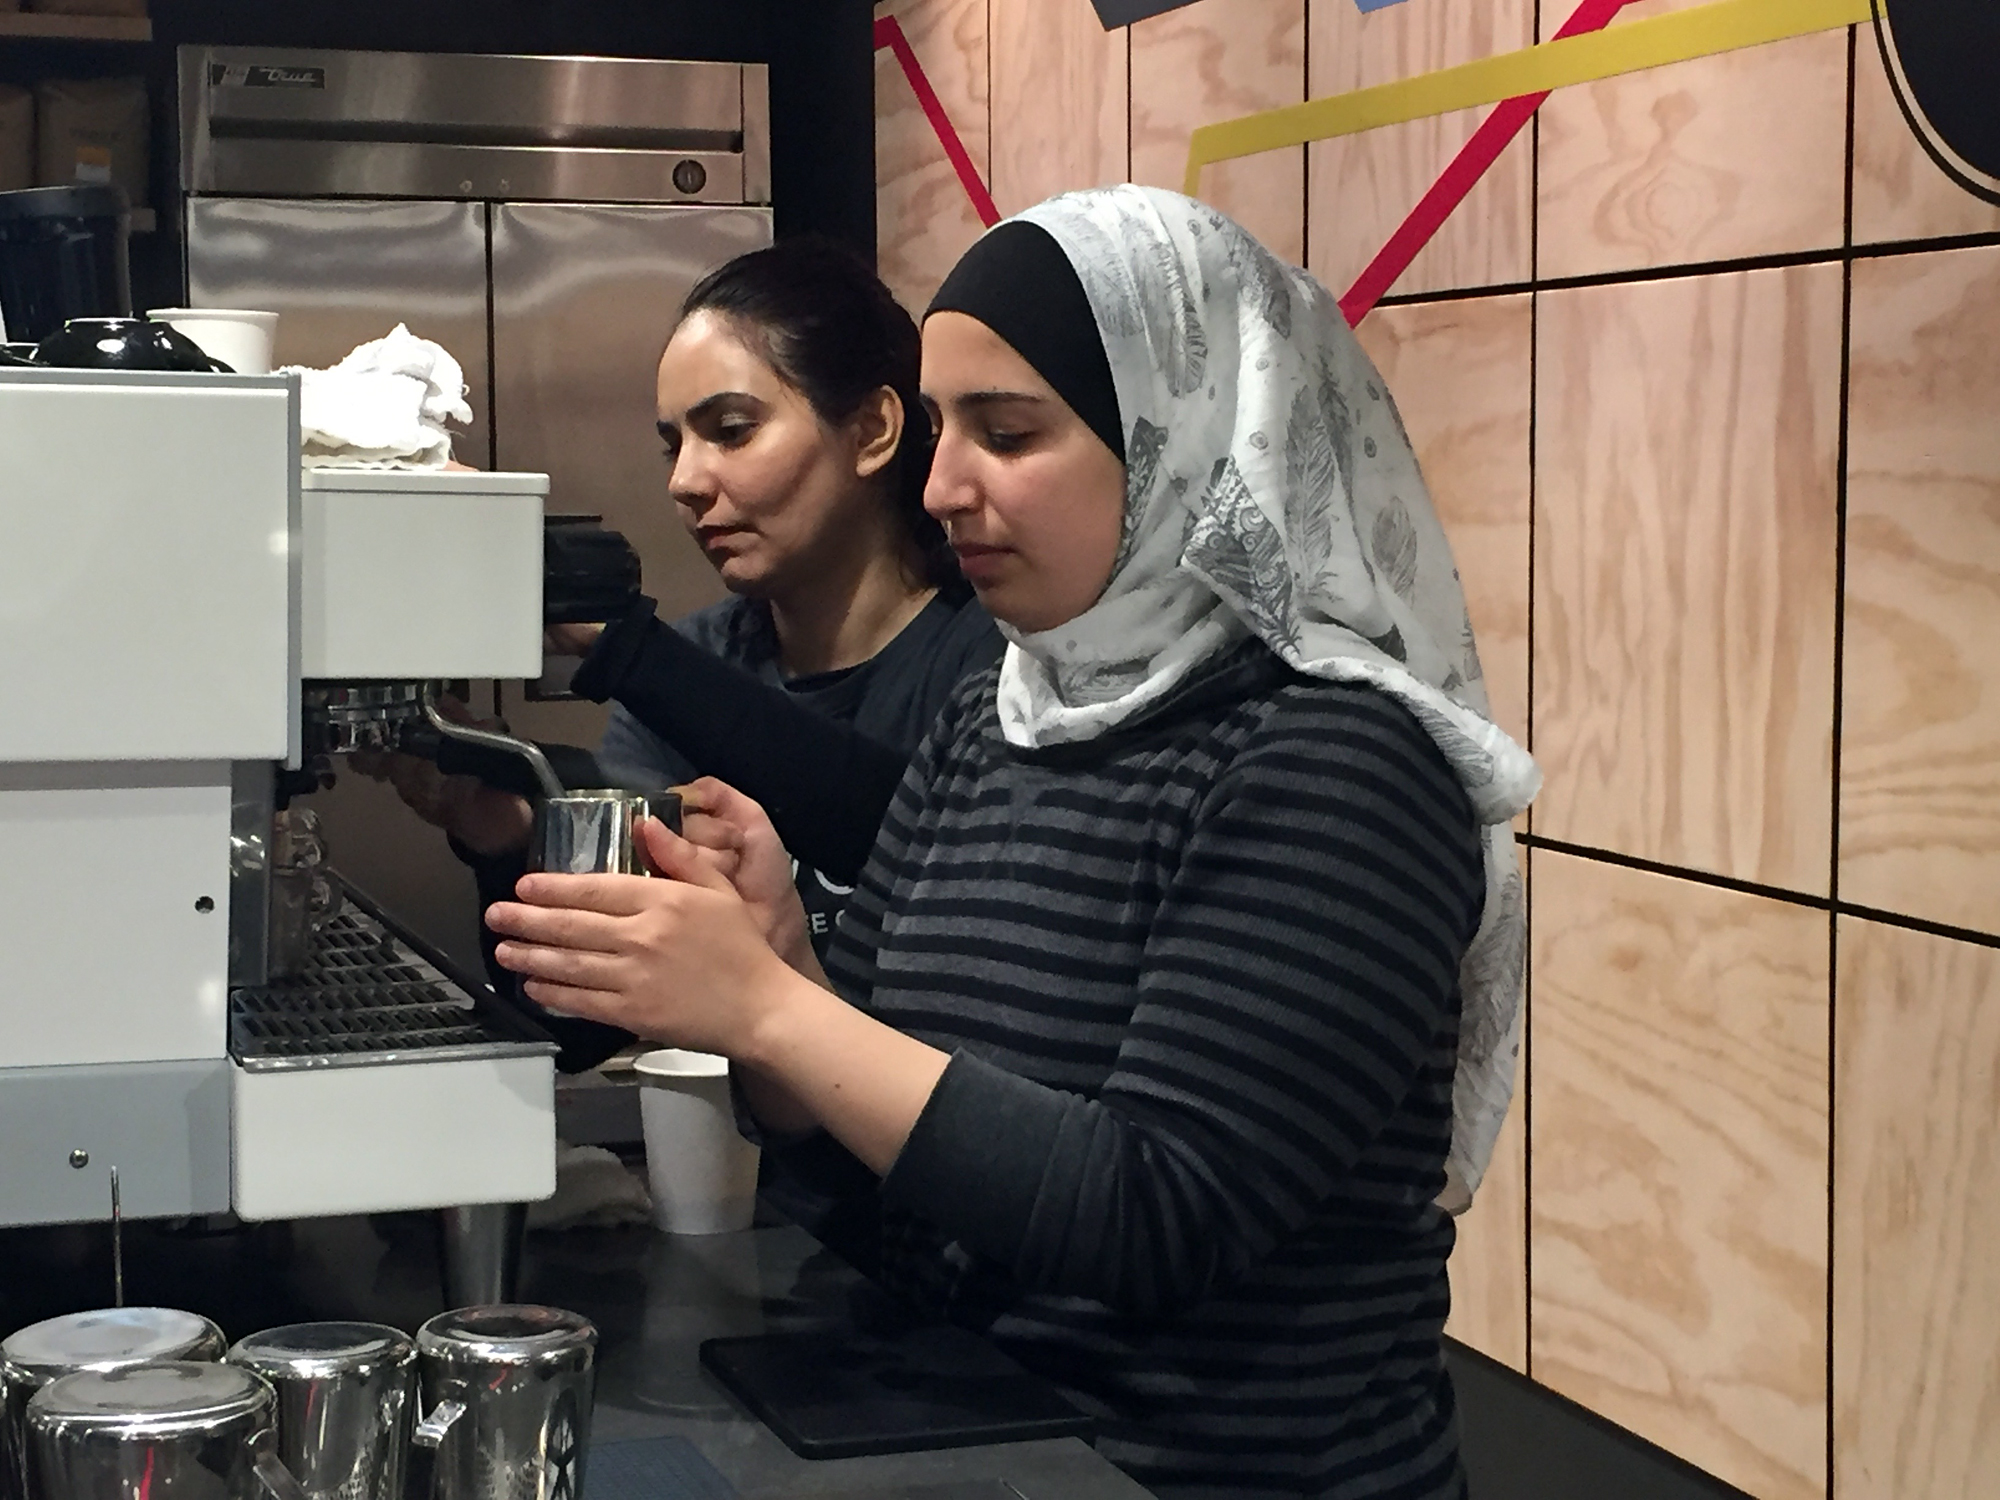 Nazira works with Batool, a Syrian refugee who was interviewed on The California Report. See link below to hear her family's story.